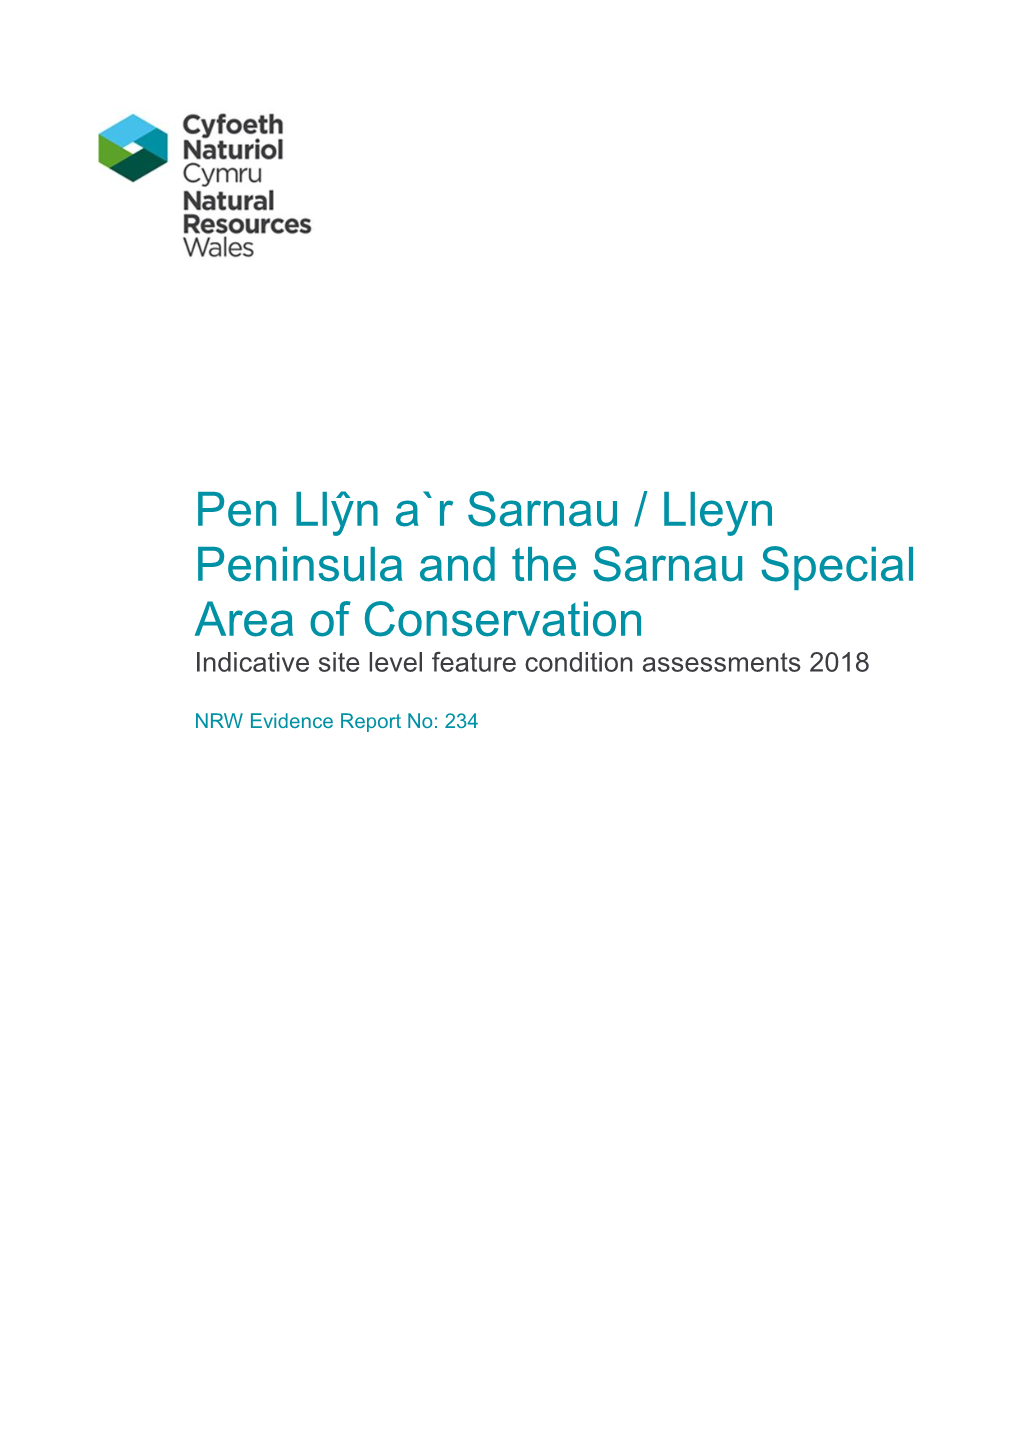 Pen Llŷn A`R Sarnau / Lleyn Peninsula and the Sarnau Special Area of Conservation Indicative Site Level Feature Condition Assessments 2018